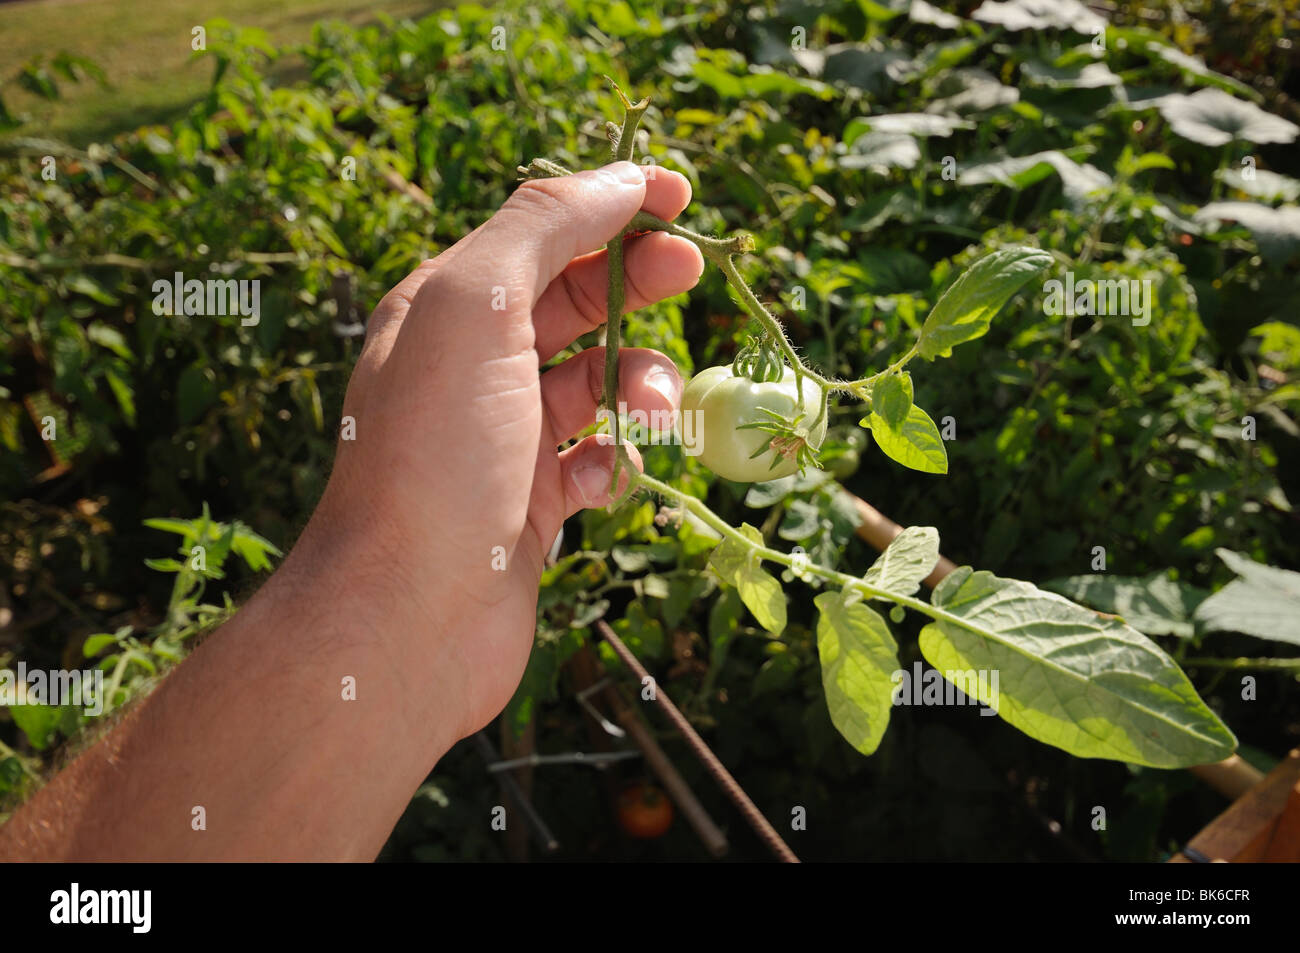 Hand holding a green tomato on the plant branch with a vegetable garden on the background Stock Photo